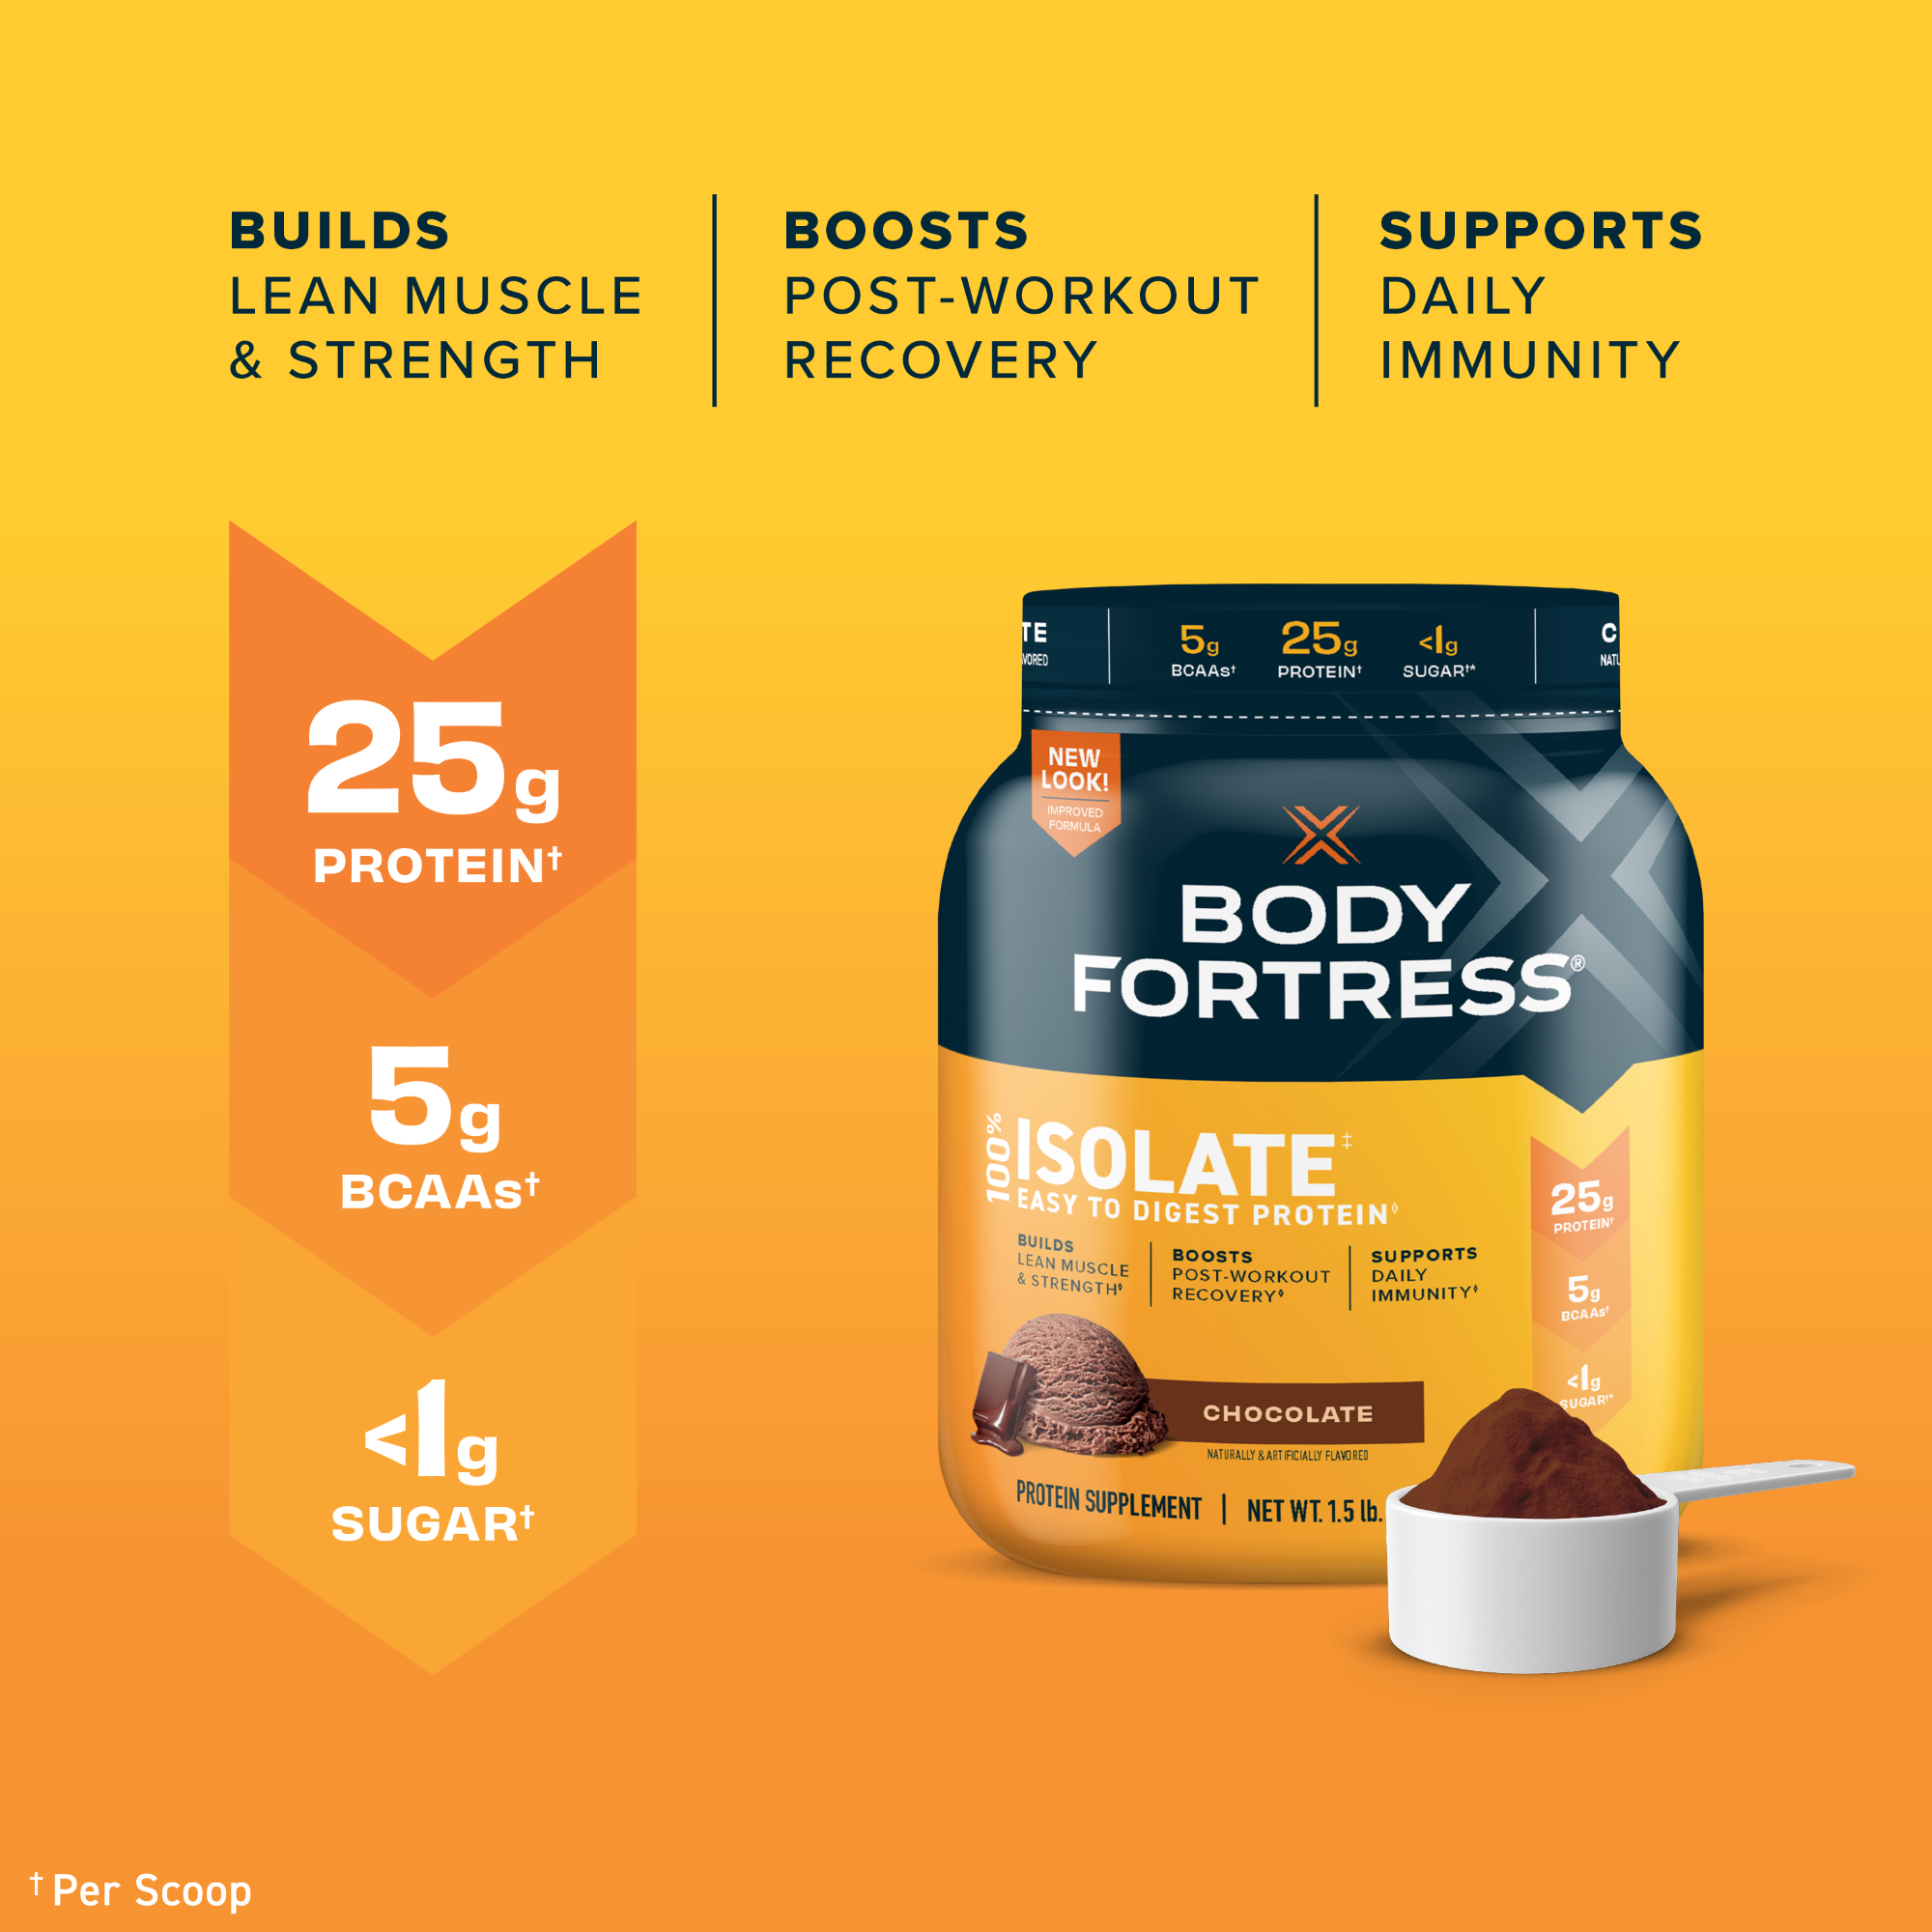 Body Fortress 100% Isolate Easy-to-Digest Protein Powder, Chocolate, 1.5lbs - image 3 of 8